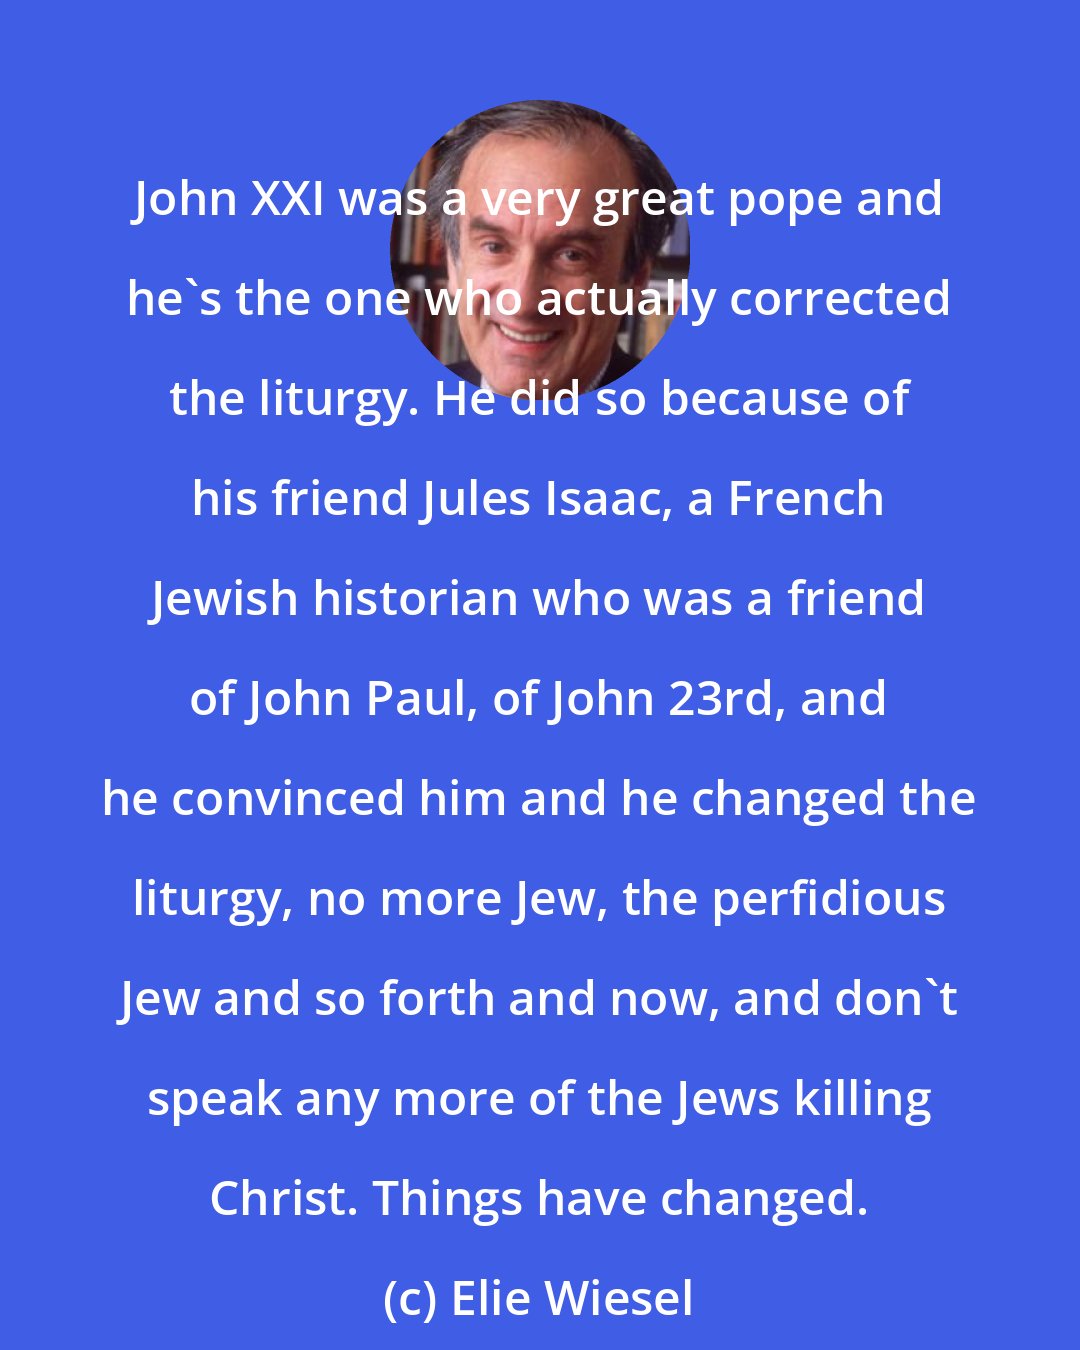 Elie Wiesel: John XXI was a very great pope and he's the one who actually corrected the liturgy. He did so because of his friend Jules Isaac, a French Jewish historian who was a friend of John Paul, of John 23rd, and he convinced him and he changed the liturgy, no more Jew, the perfidious Jew and so forth and now, and don't speak any more of the Jews killing Christ. Things have changed.